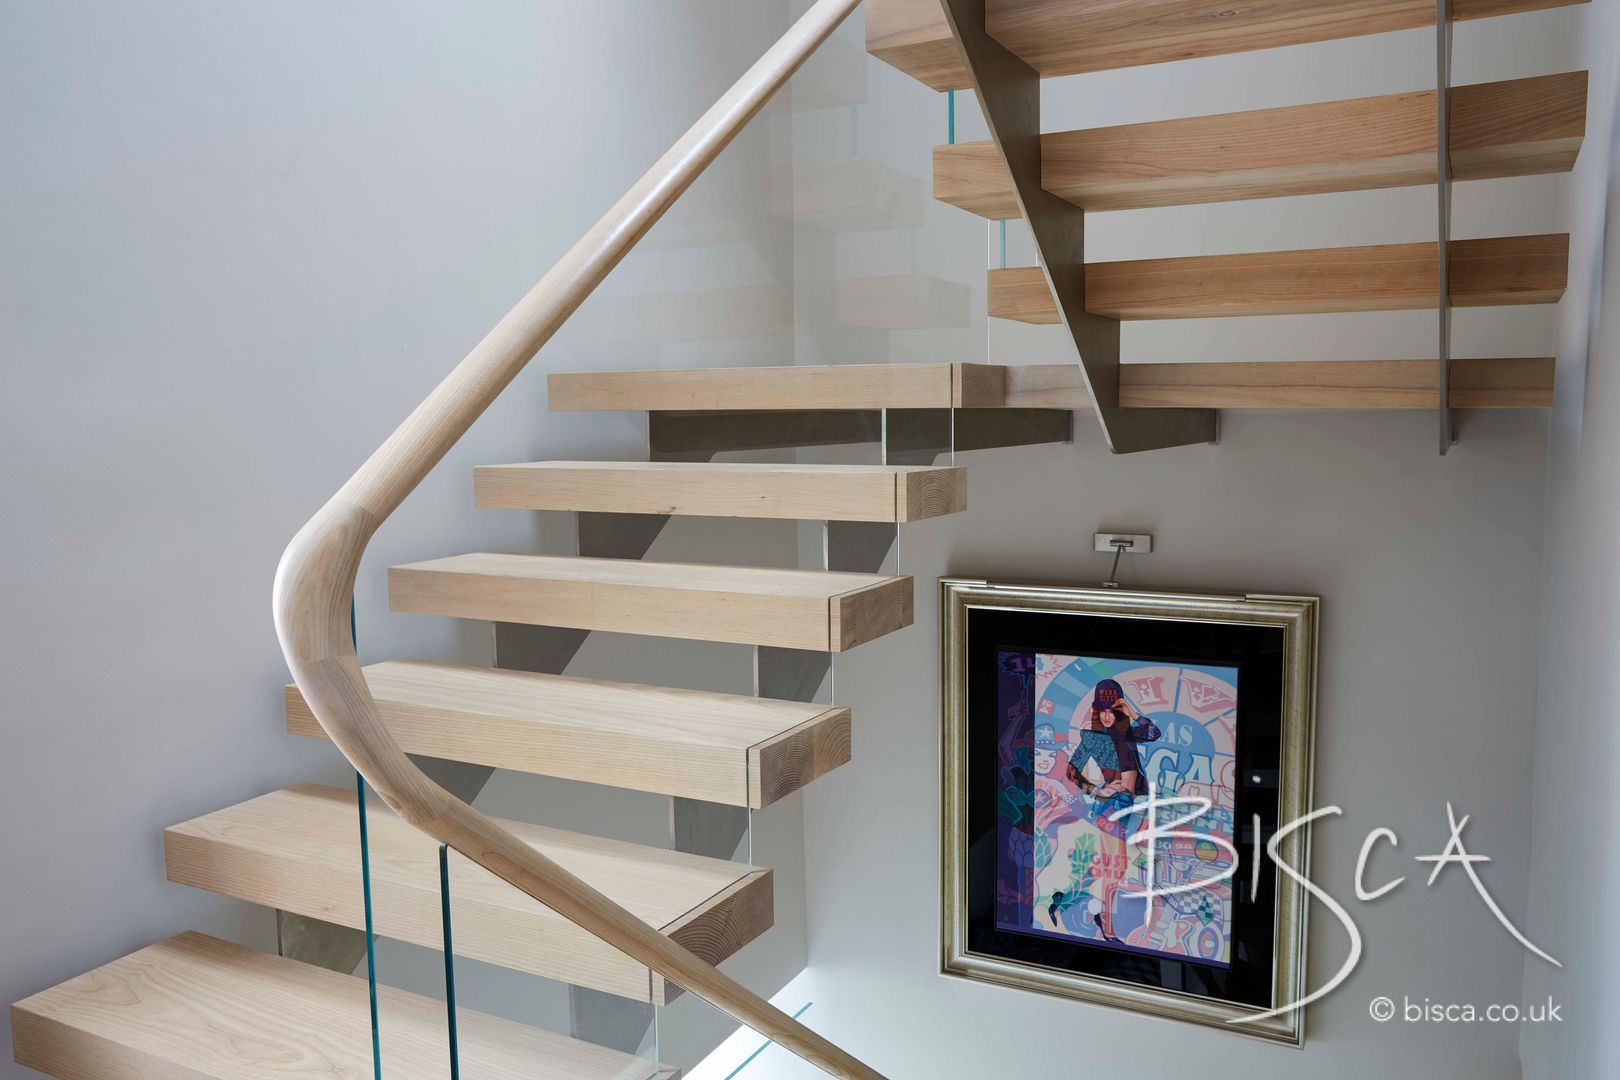 Multi Flight Staircase Design by Bisca Bisca Staircases モダンスタイルの 玄関&廊下&階段 staircase,stair